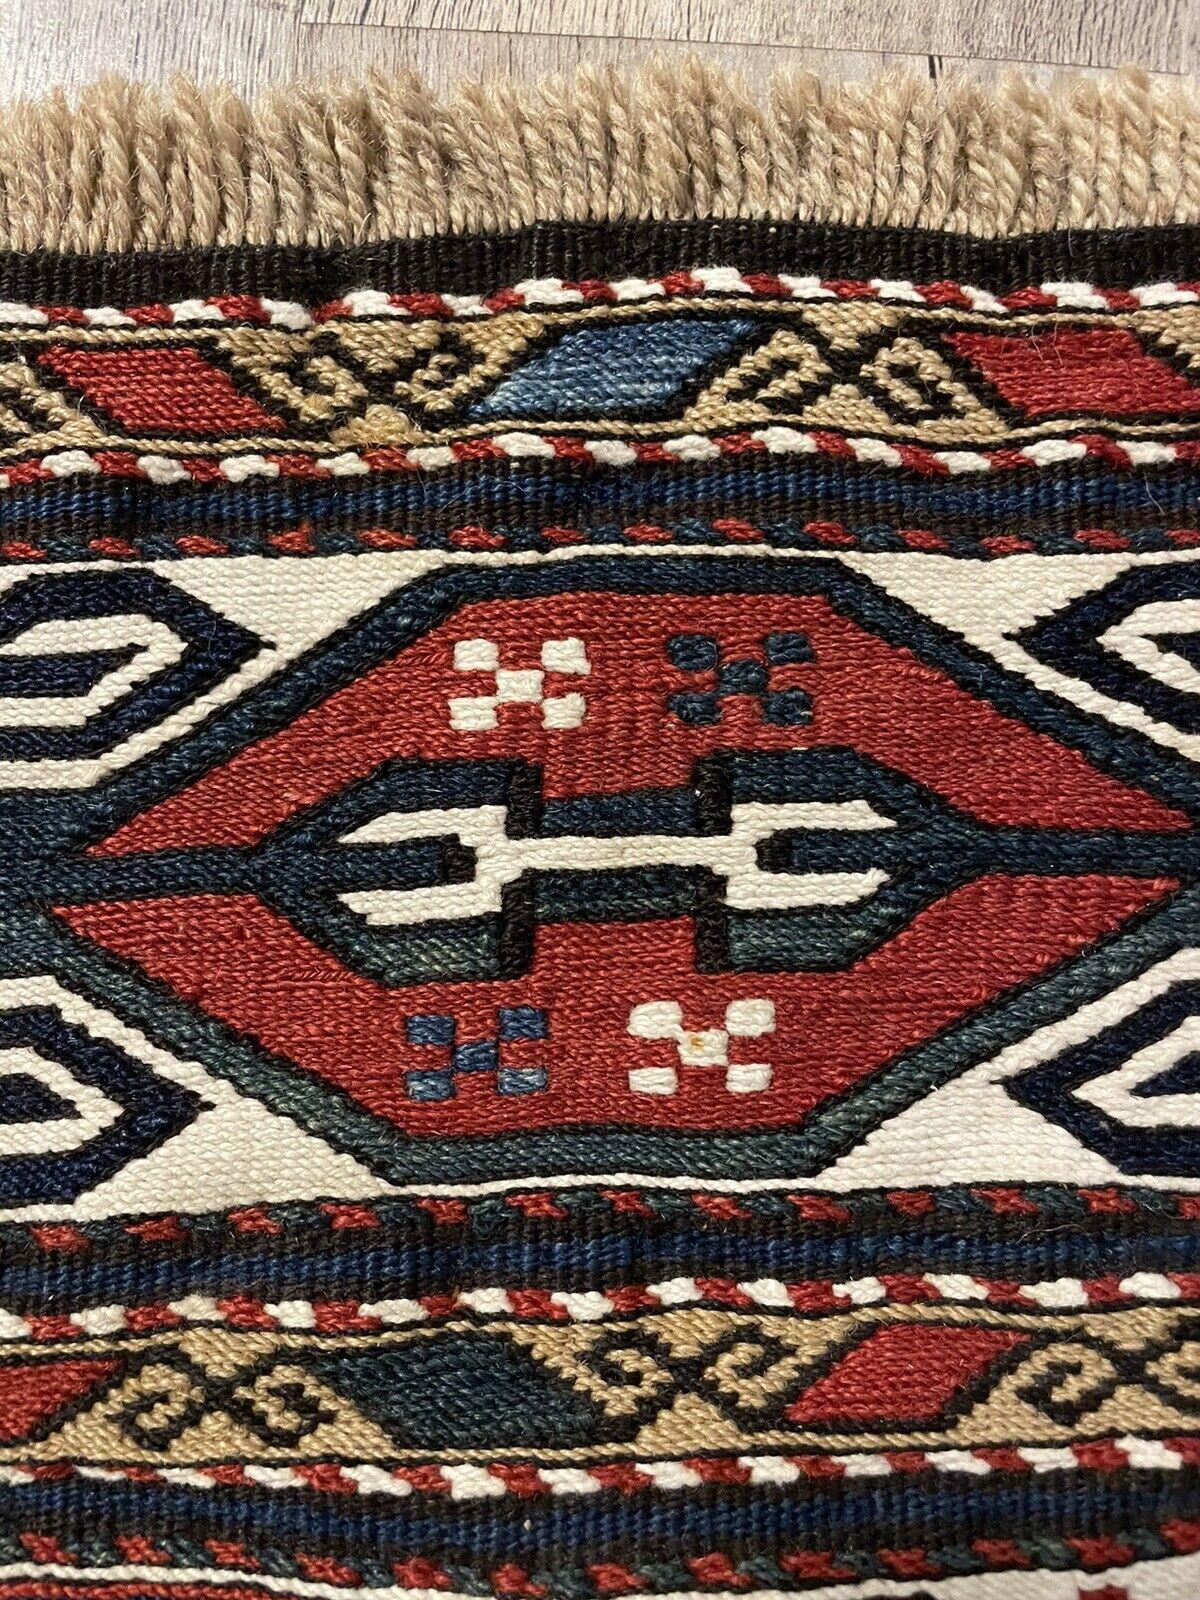 Handmade Antique Persian Style Sumak Collectible Kilim 1.3' x 1.8, 1900s - 1N04 For Sale 1